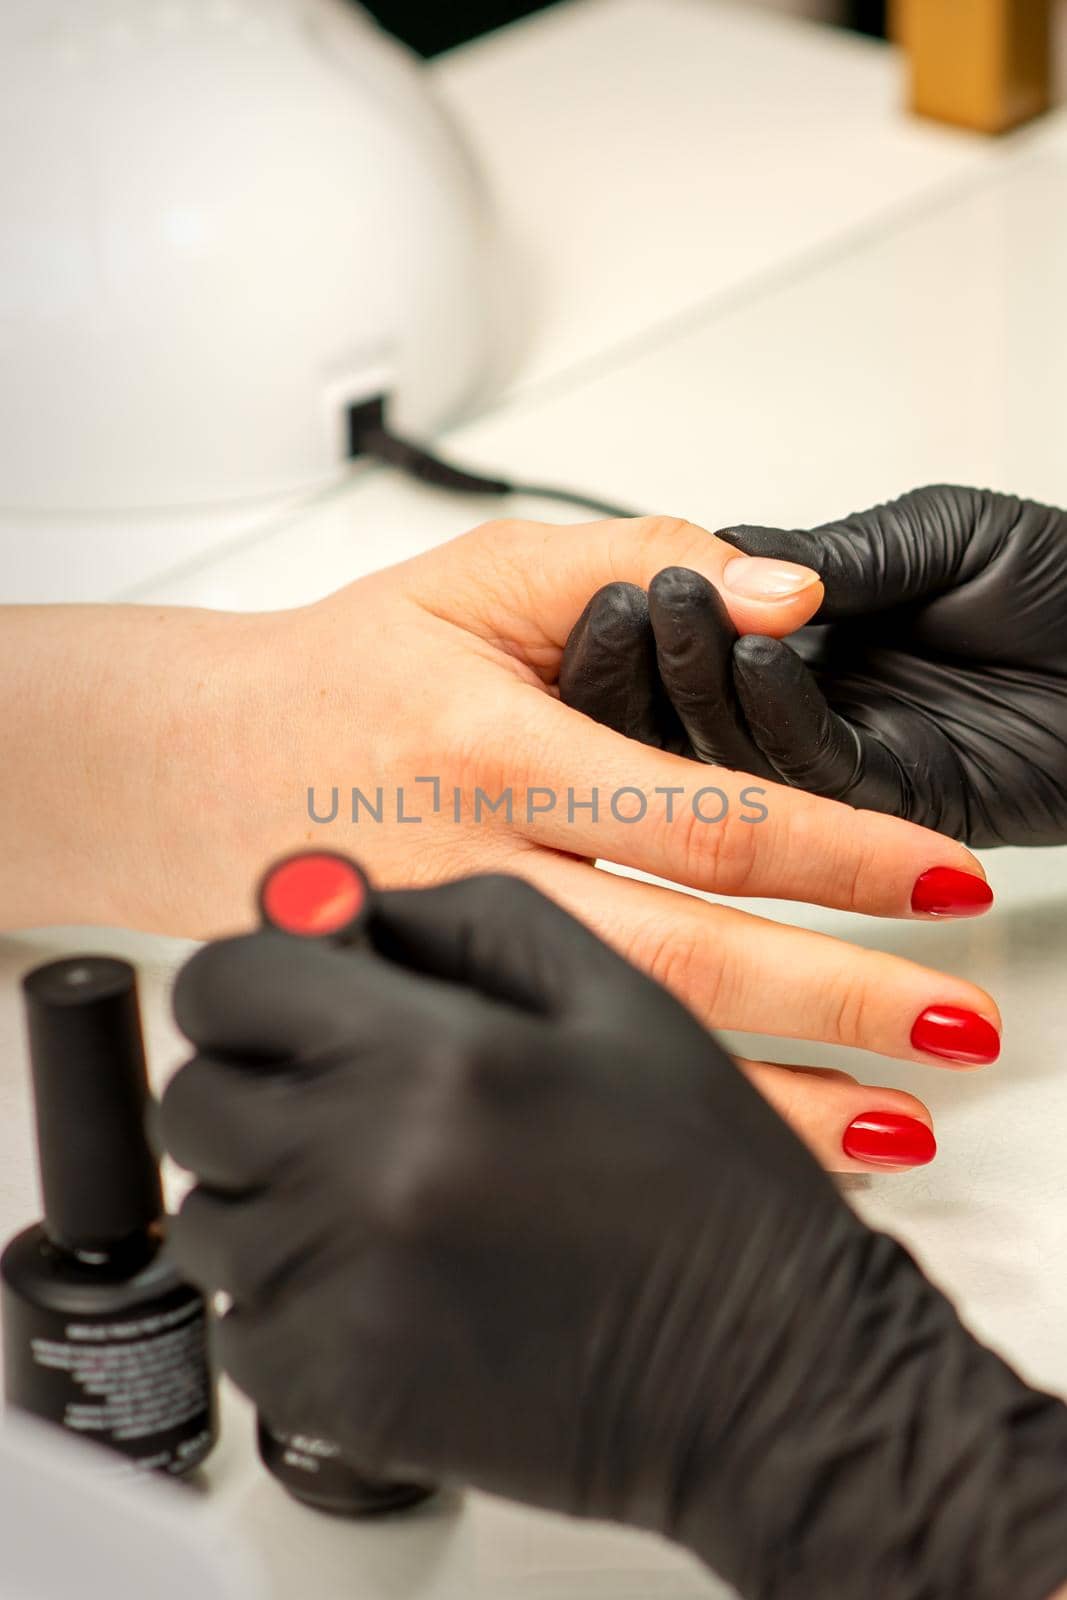 Professional manicure. A manicurist is painting the female nails of a client with red nail polish in a beauty salon, close up. Beauty industry concept. by okskukuruza